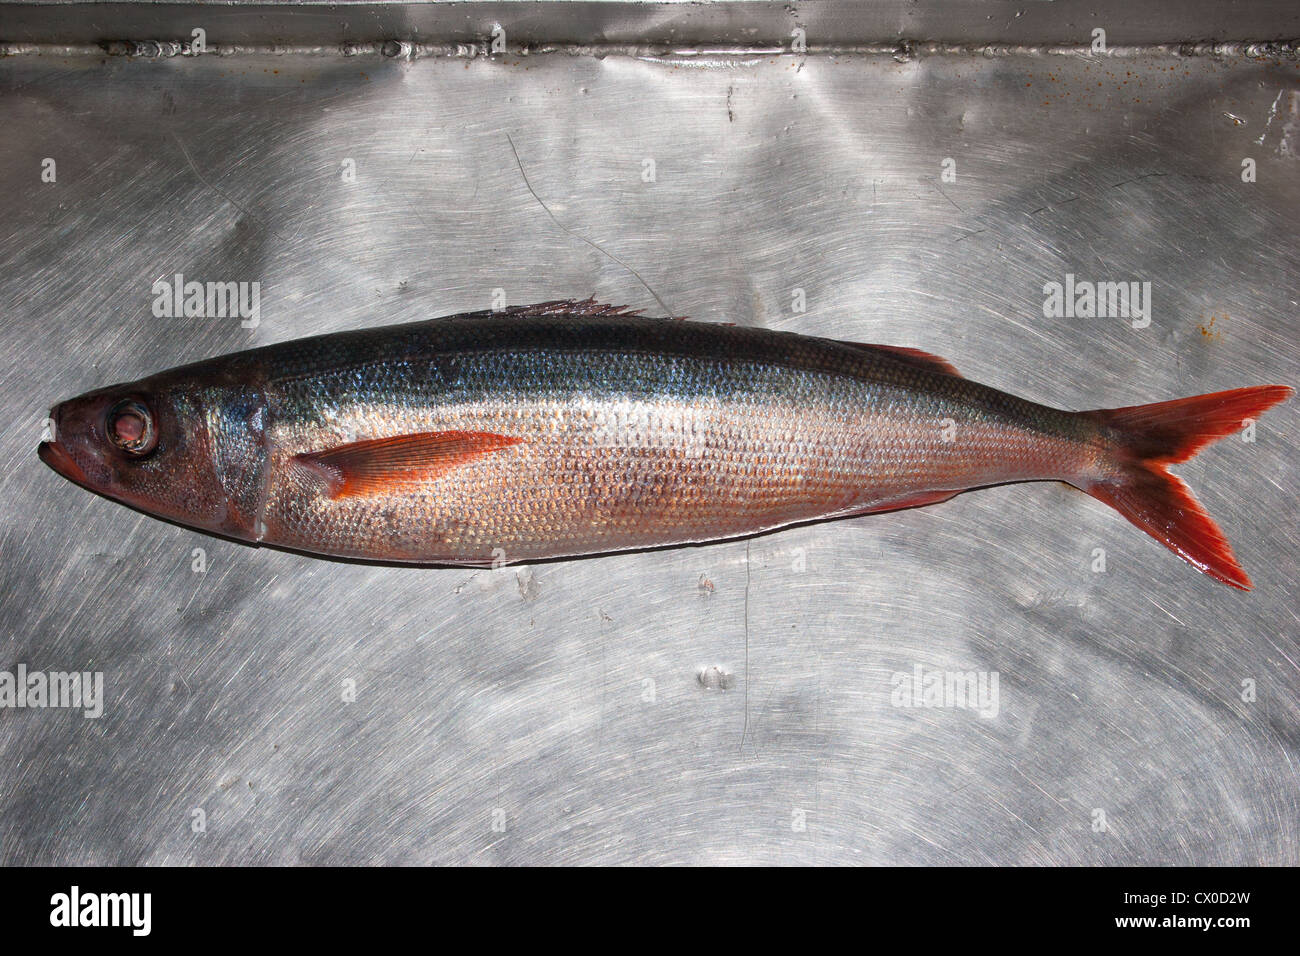 Redbait (Emmelichthys nitidus): also known as "bonnetmouth" and ...